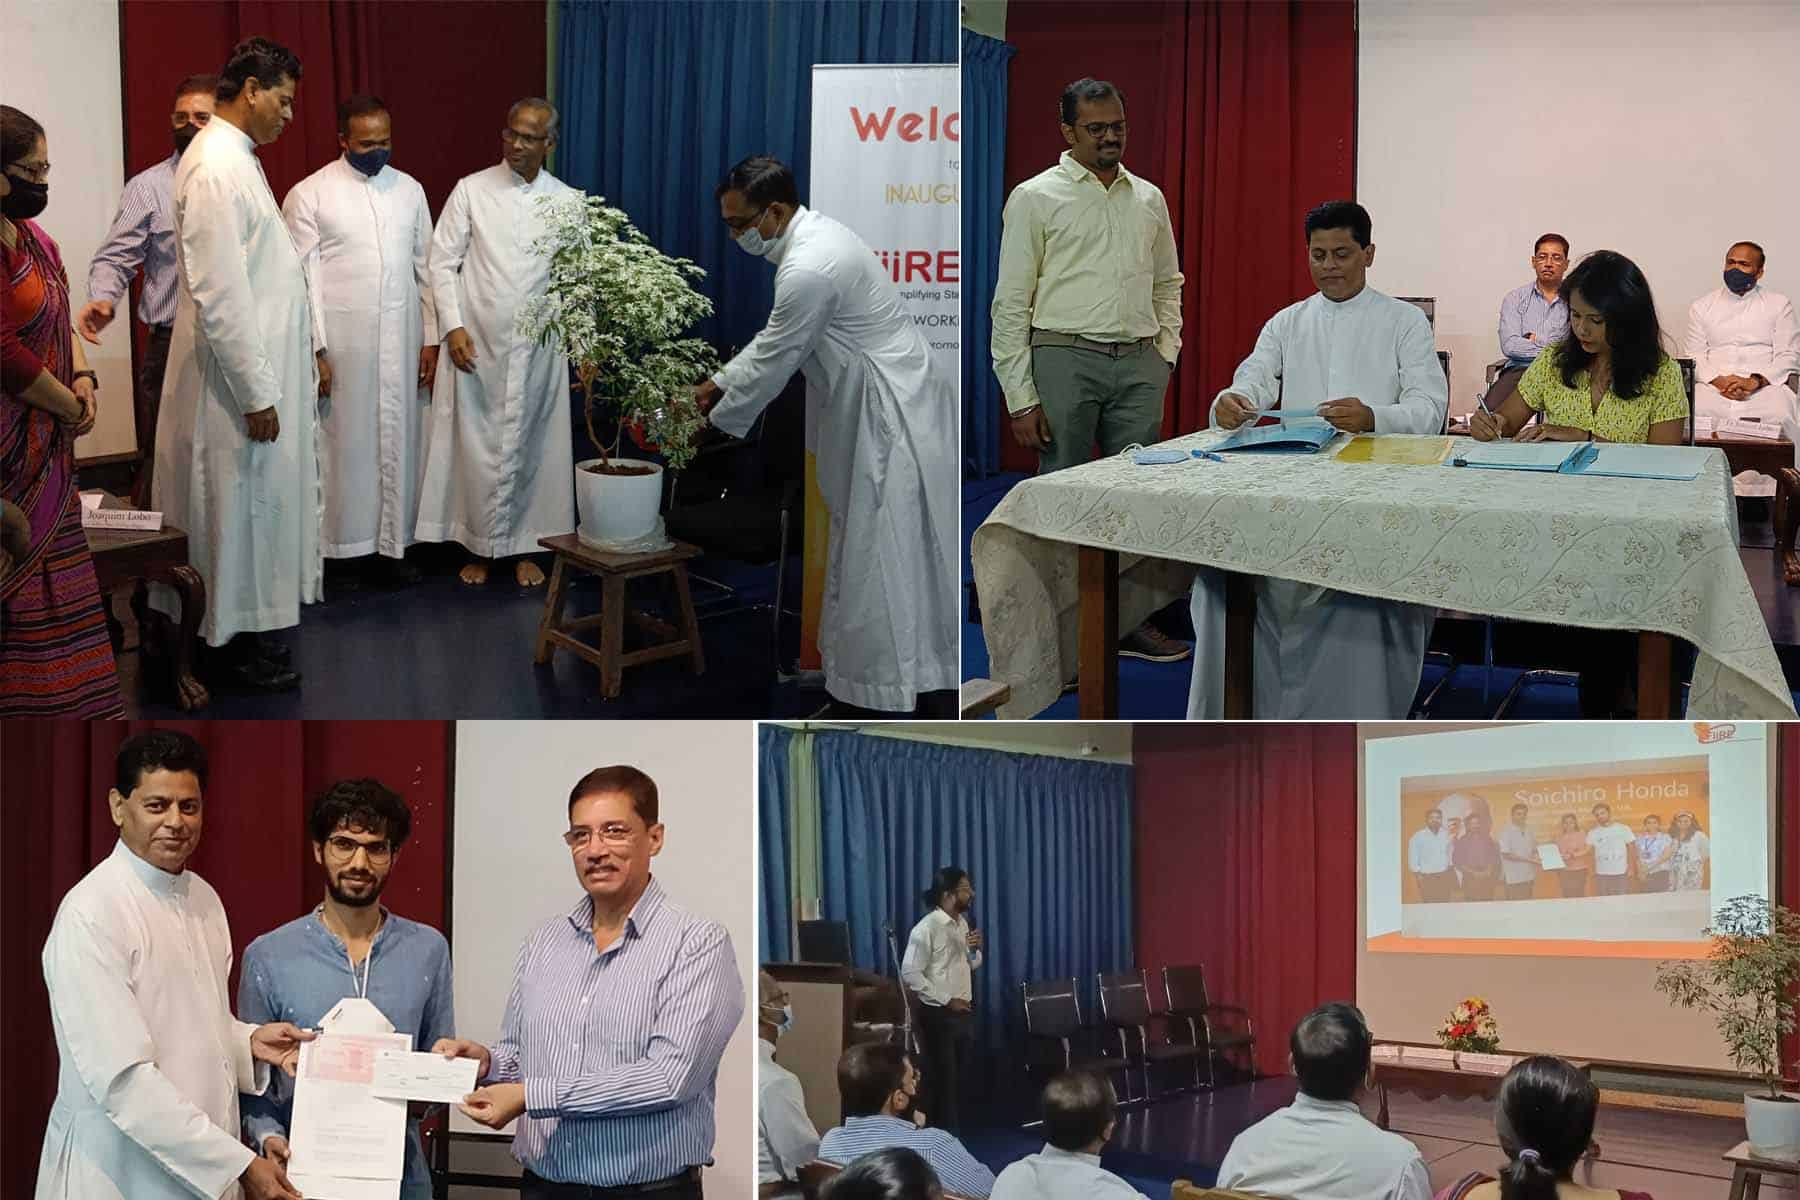 Inauguration Ceremony of Forum for Innovation Incubation Research and Entrepreneurship (FiiRe) at the Don Bosco College Panjim